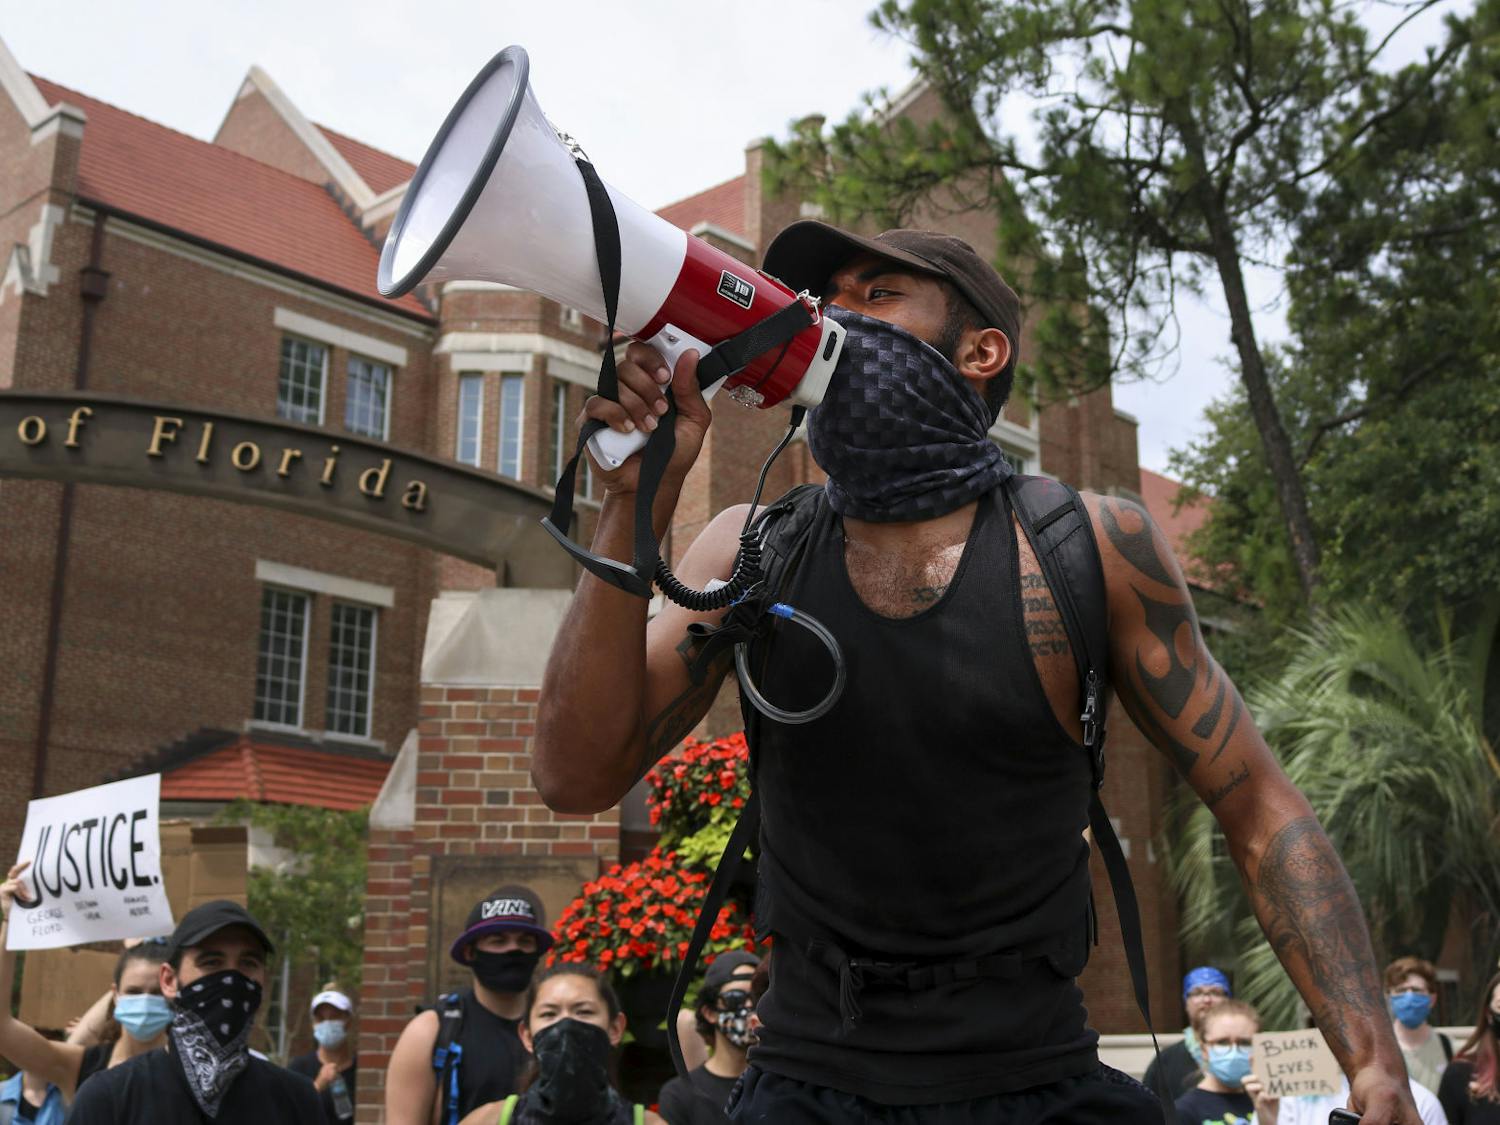 Daniel Brackett, a 24-year-old UF Physical Therapy Assistant and one of the organizers of the protest, shouts into a megaphone in front of a crowd of about 100 people at the intersection of 13th Street and University Avenue Wednesday as part of a protest against police brutality.